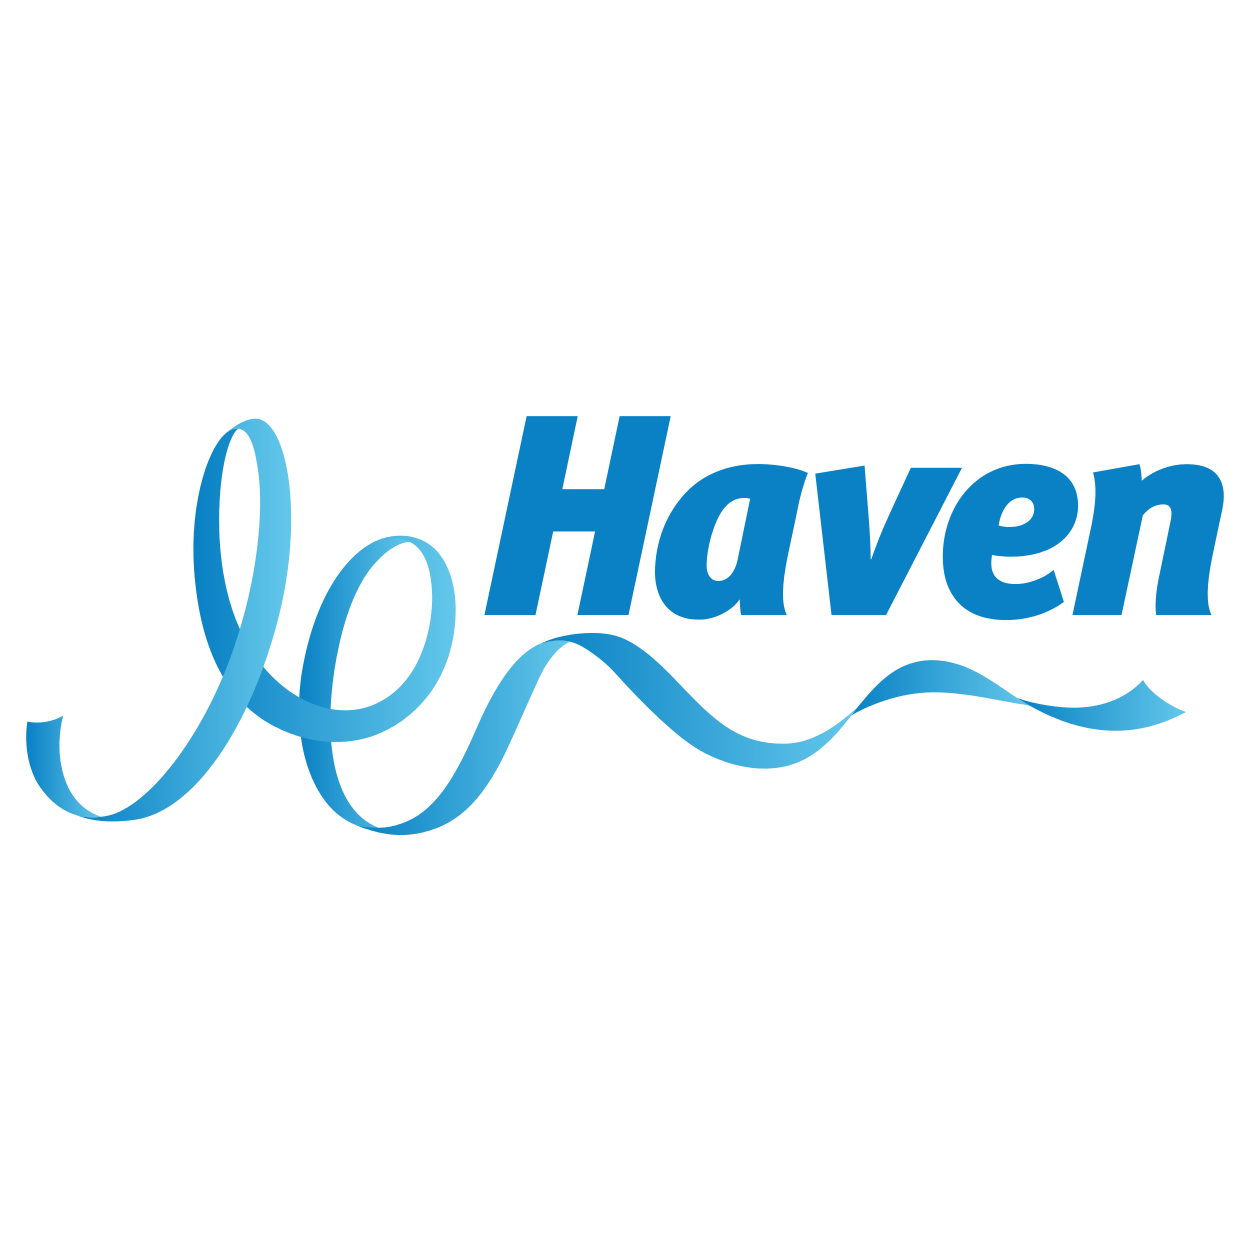 Haven Holidays Coupons & Promo Codes